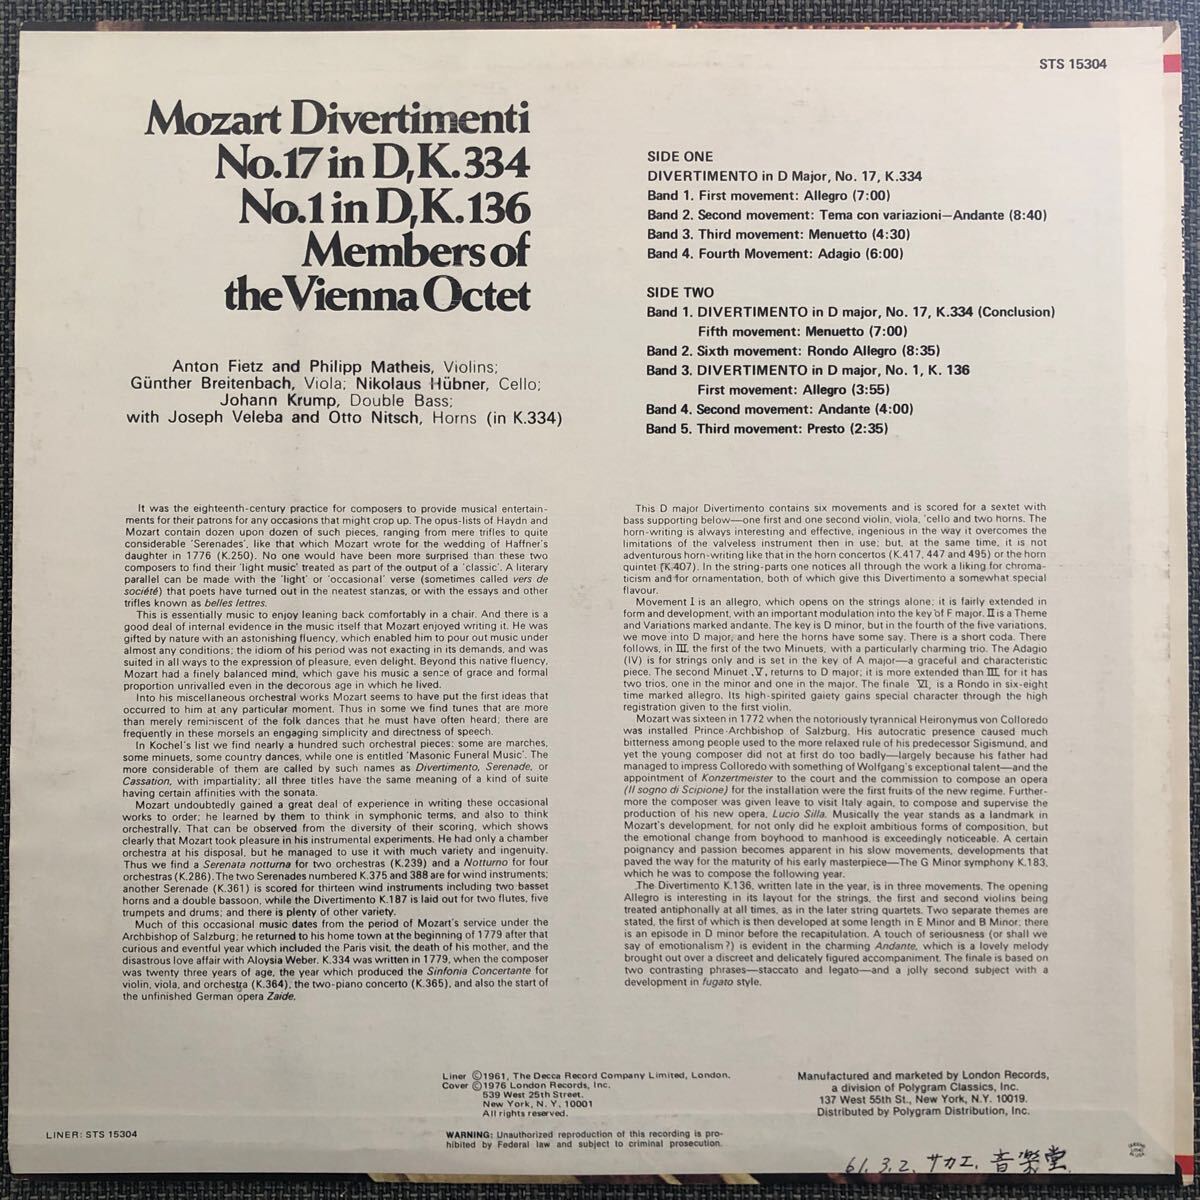 LPレコードMozart Divertimenti No.17 in D,K.334 No.1 in D,K.136 STS-15304 海外版　レトロ　ヴィンテージ_画像2